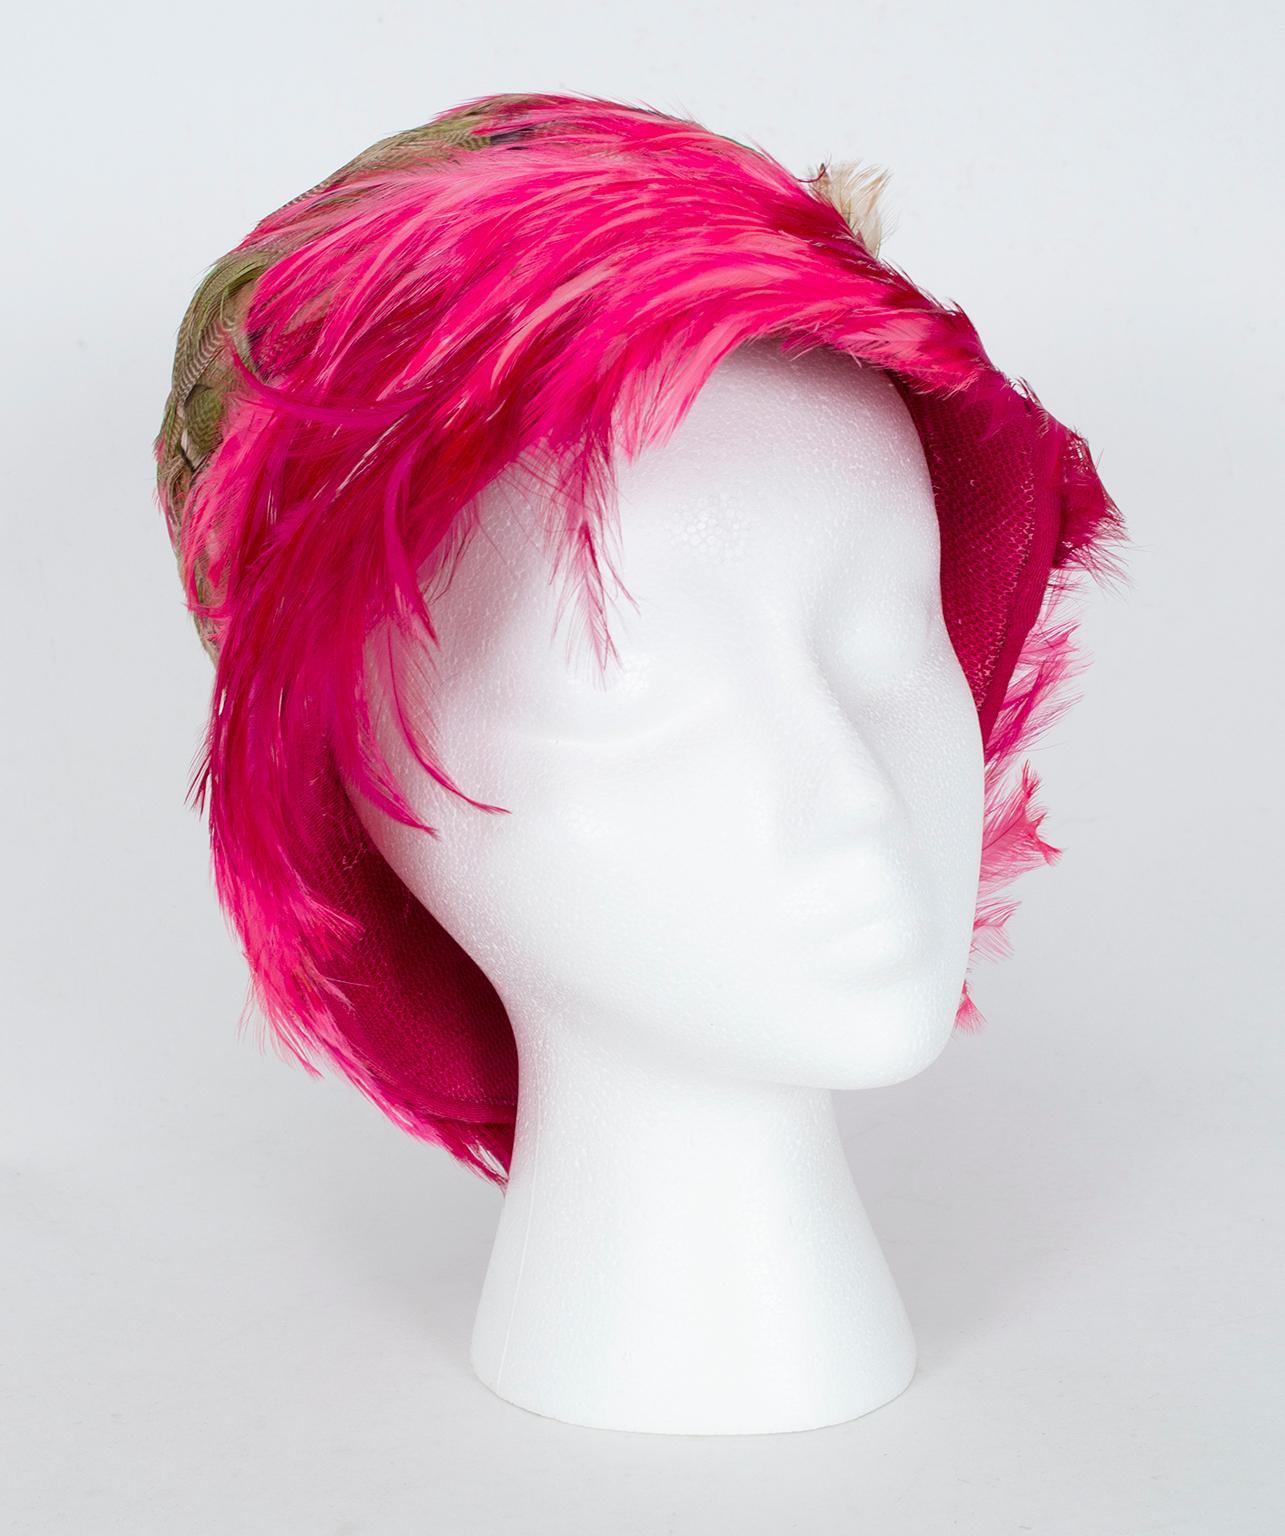 A statement and punctuation all in one, this feather cloche straddles the line between playful and dramatic depending on how it’s styled. Its searing (and we mean “searing!”) color lends funk and freshness to casual wear and cool sophistication to